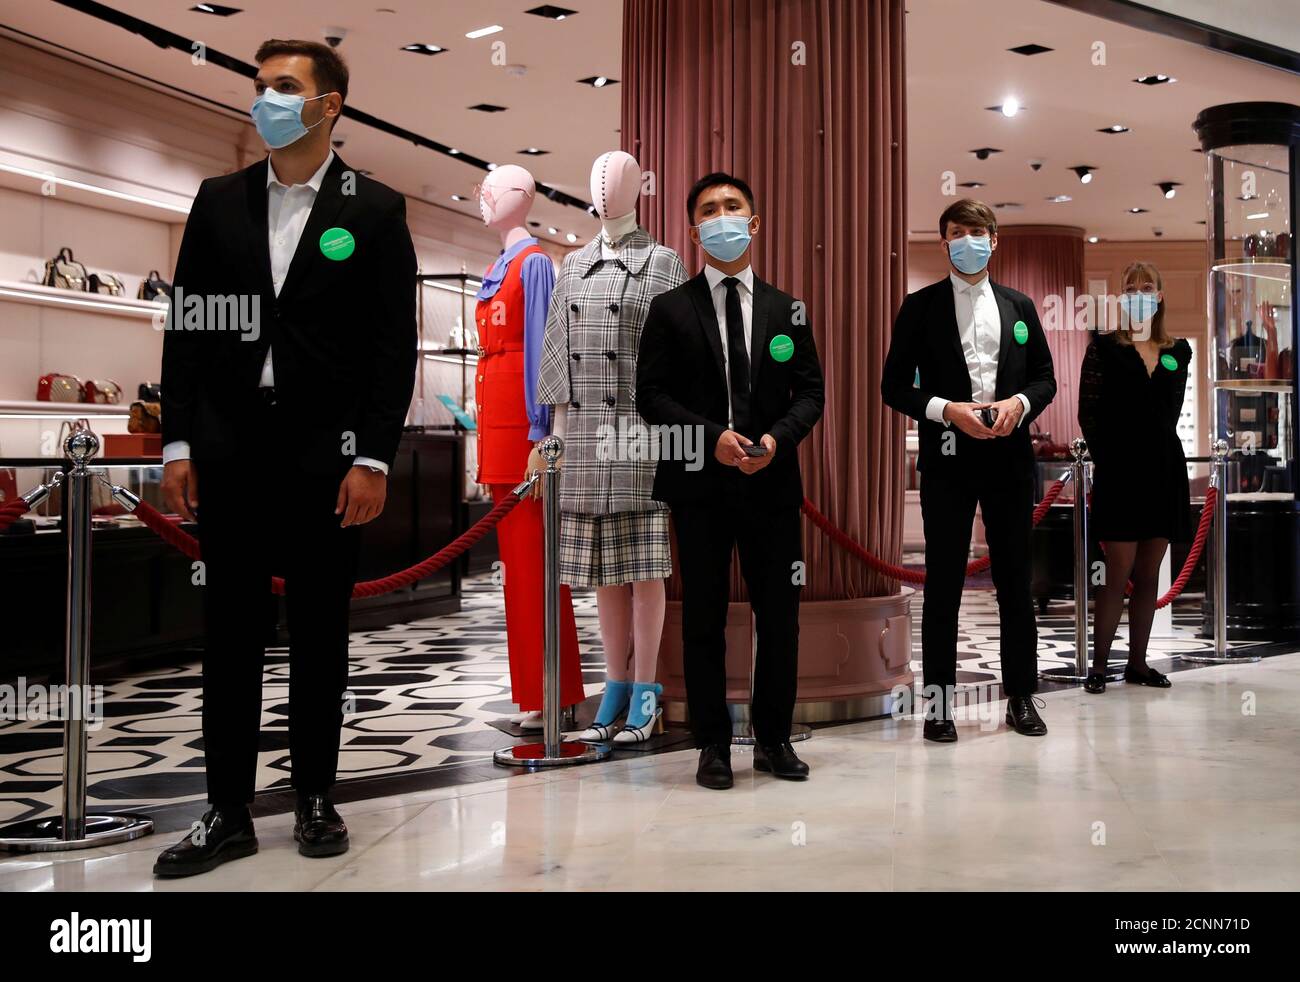 Staff members, wearing protective face masks, stand in front of a Gucci  shop inside the department store Le Printemps Haussmann before its  reopening in Paris as France eases gradually its lockdown measures